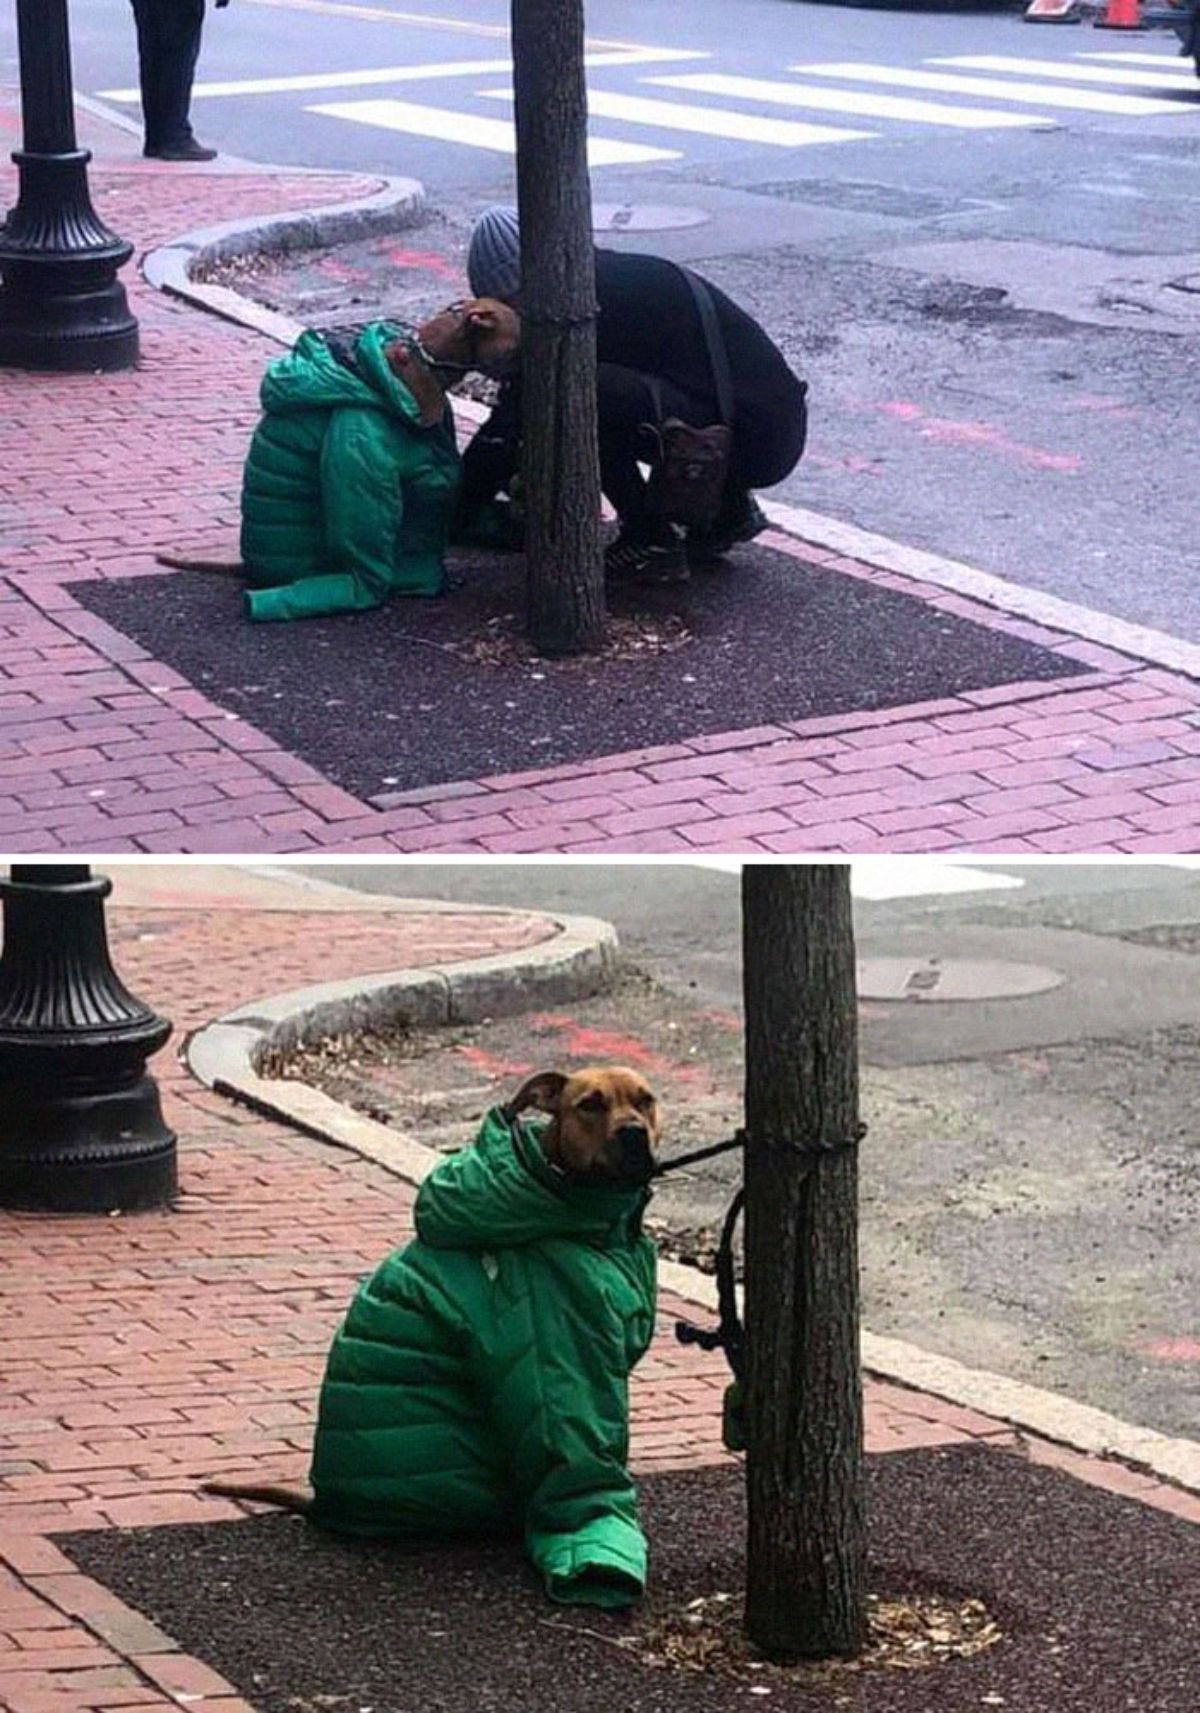 1 photo of a dog tied to a tree with a woman putting on a green coat on the dog and 1 photo of the dog sitting with the green coat